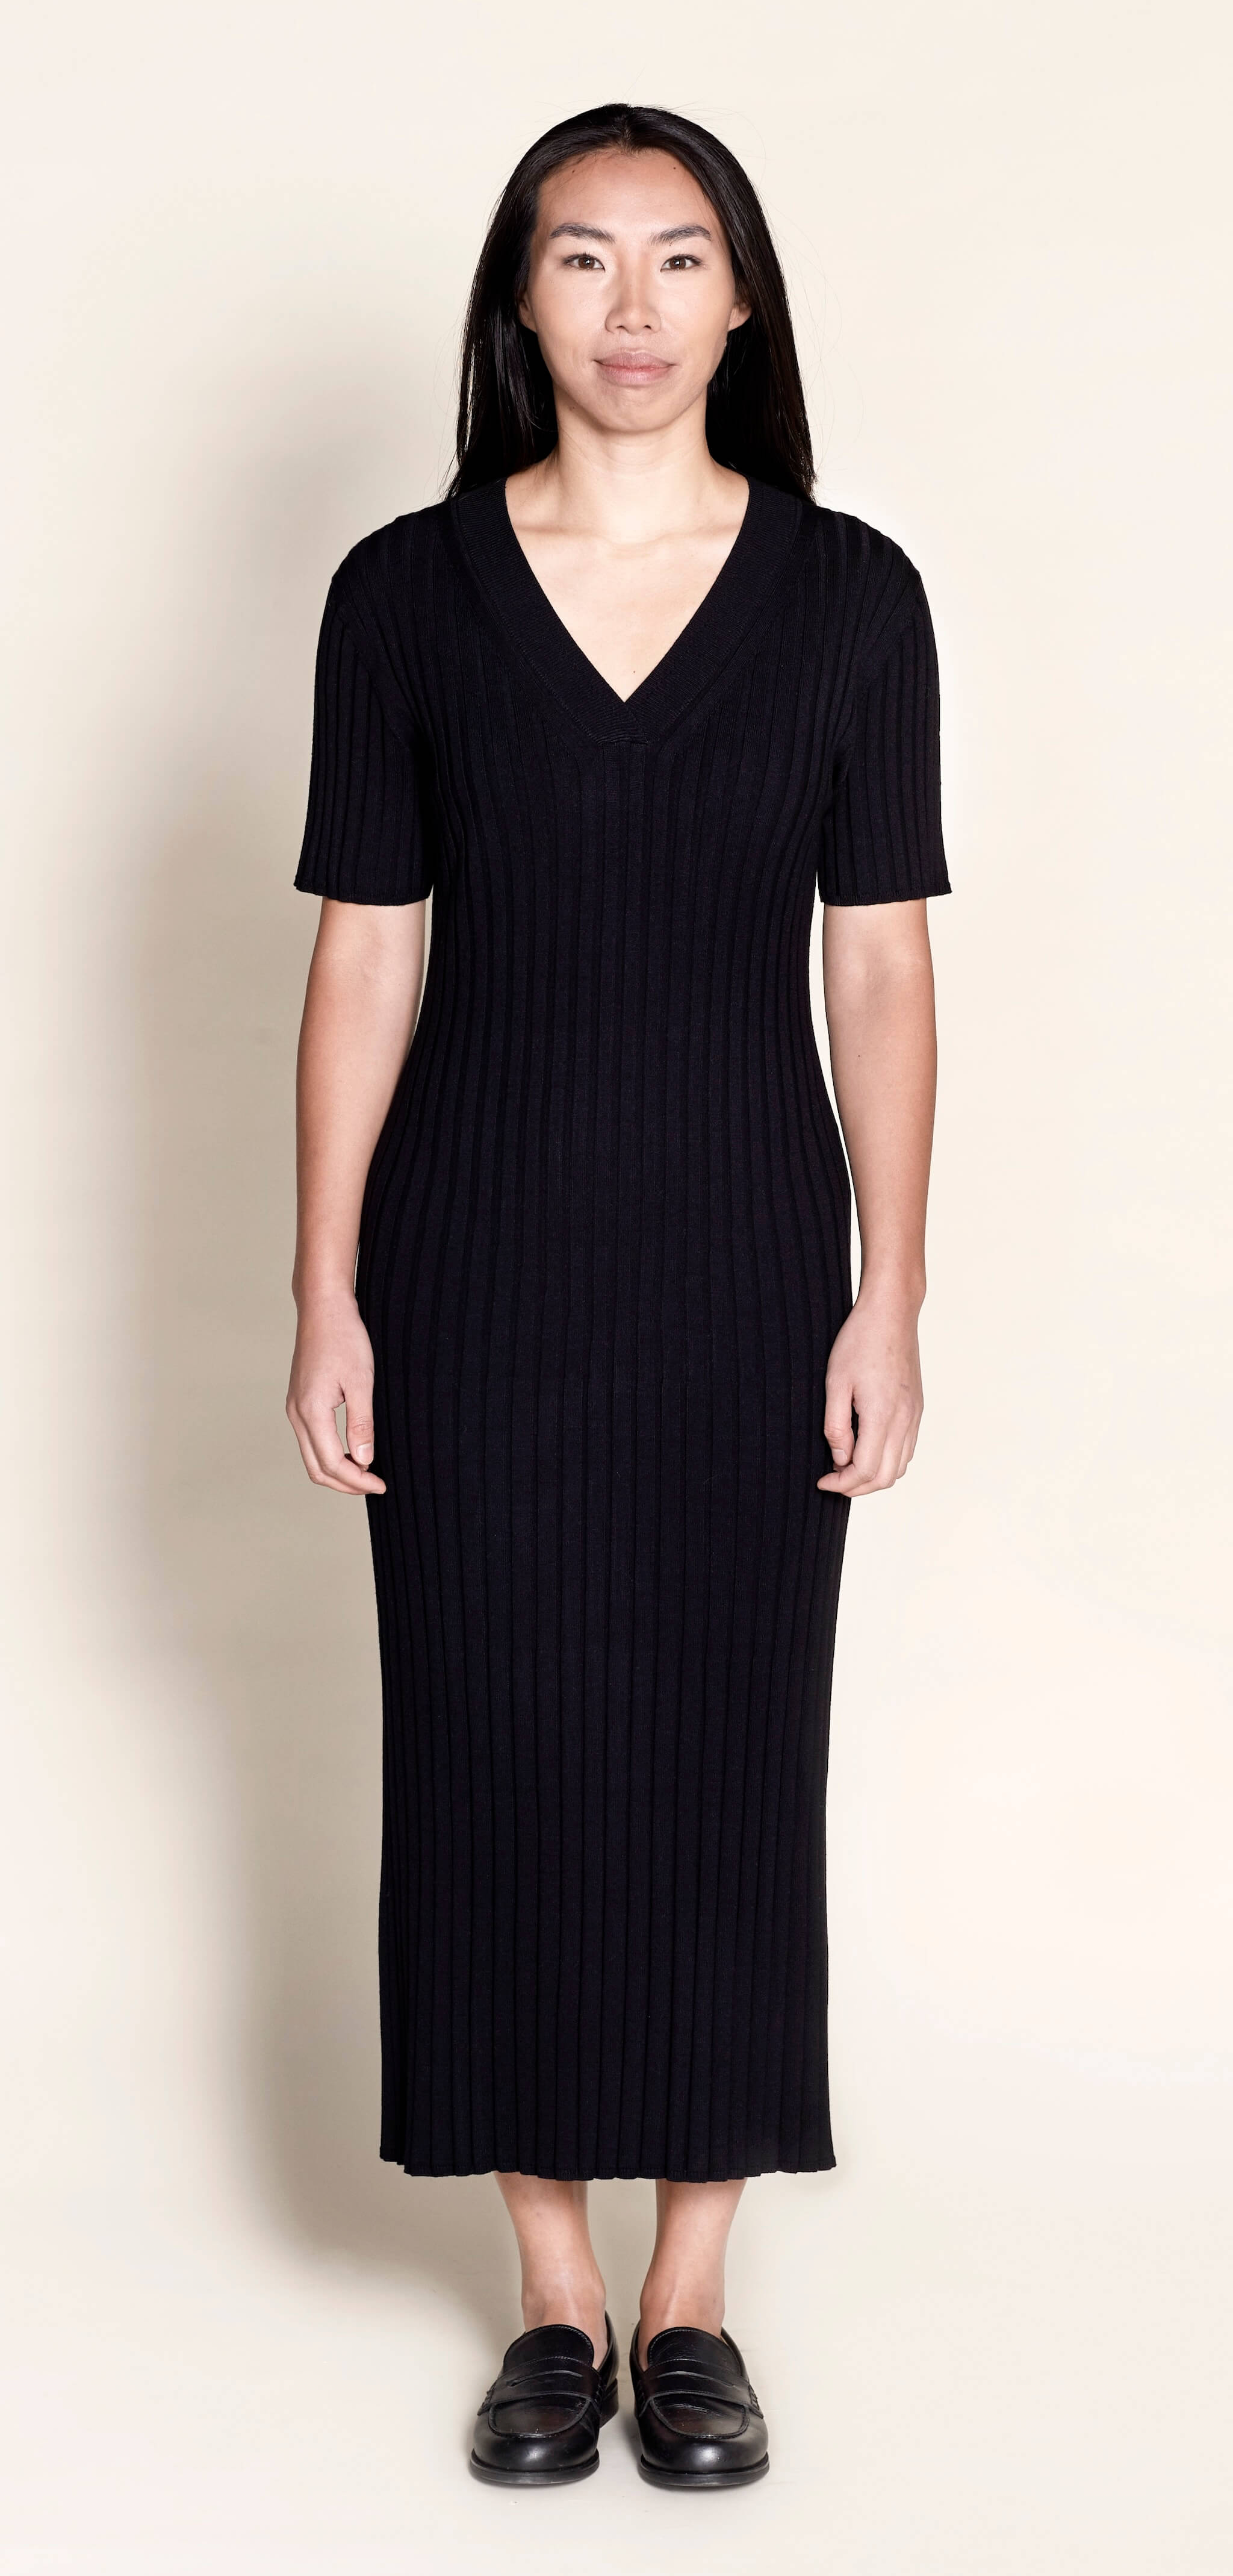 Model wears Cyme Copenhagen's classic black ribbed knit midi dress, featuring a flattering V-neck and short sleeves, a testament to sustainable, versatile women's fashion by a Danish designer.